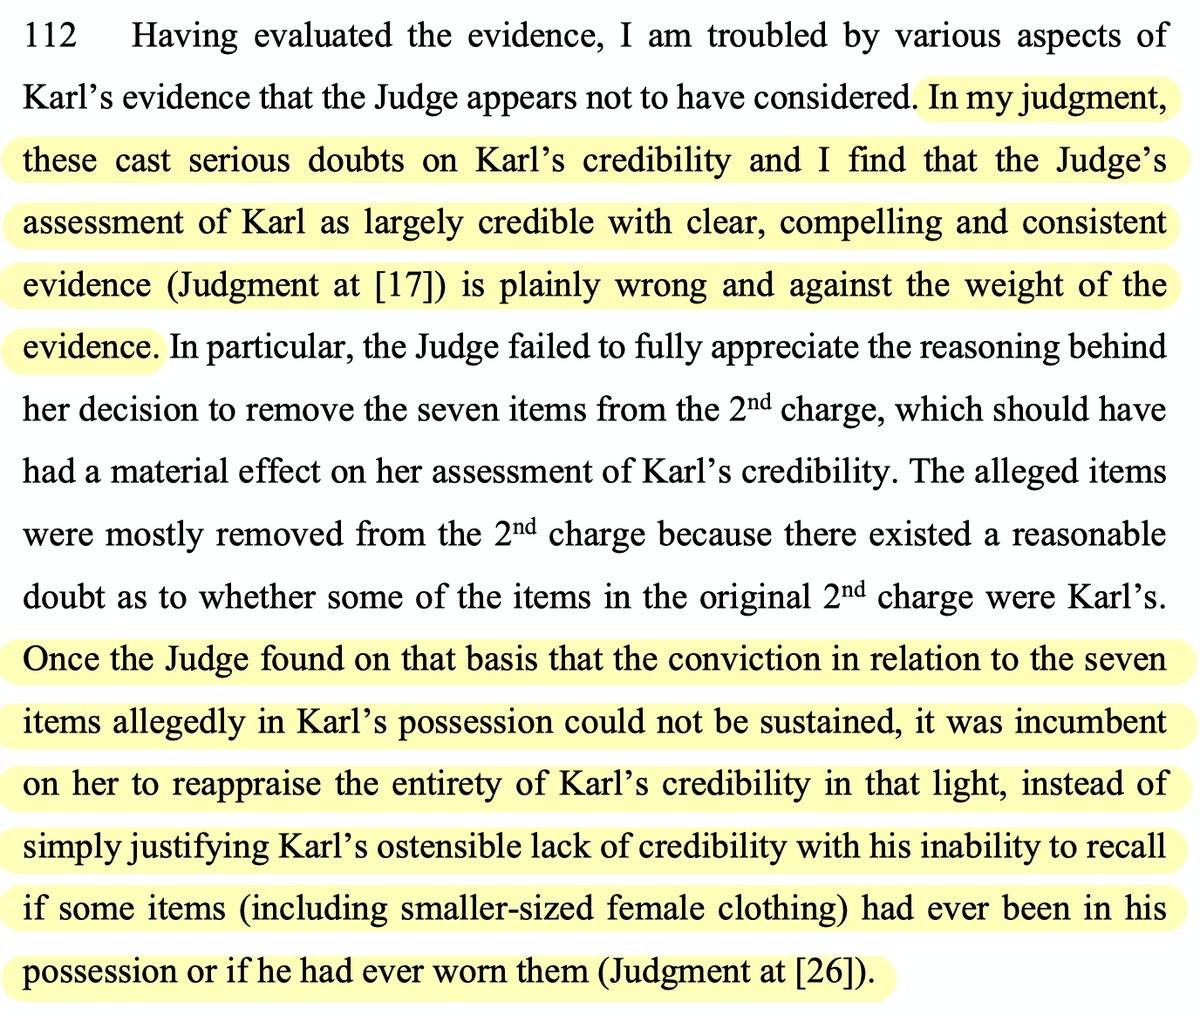 The High Court judge also found that Karl Liew had been dishonest on the stand, and expressed concern over the district judge's assessment of him as "largely credible".